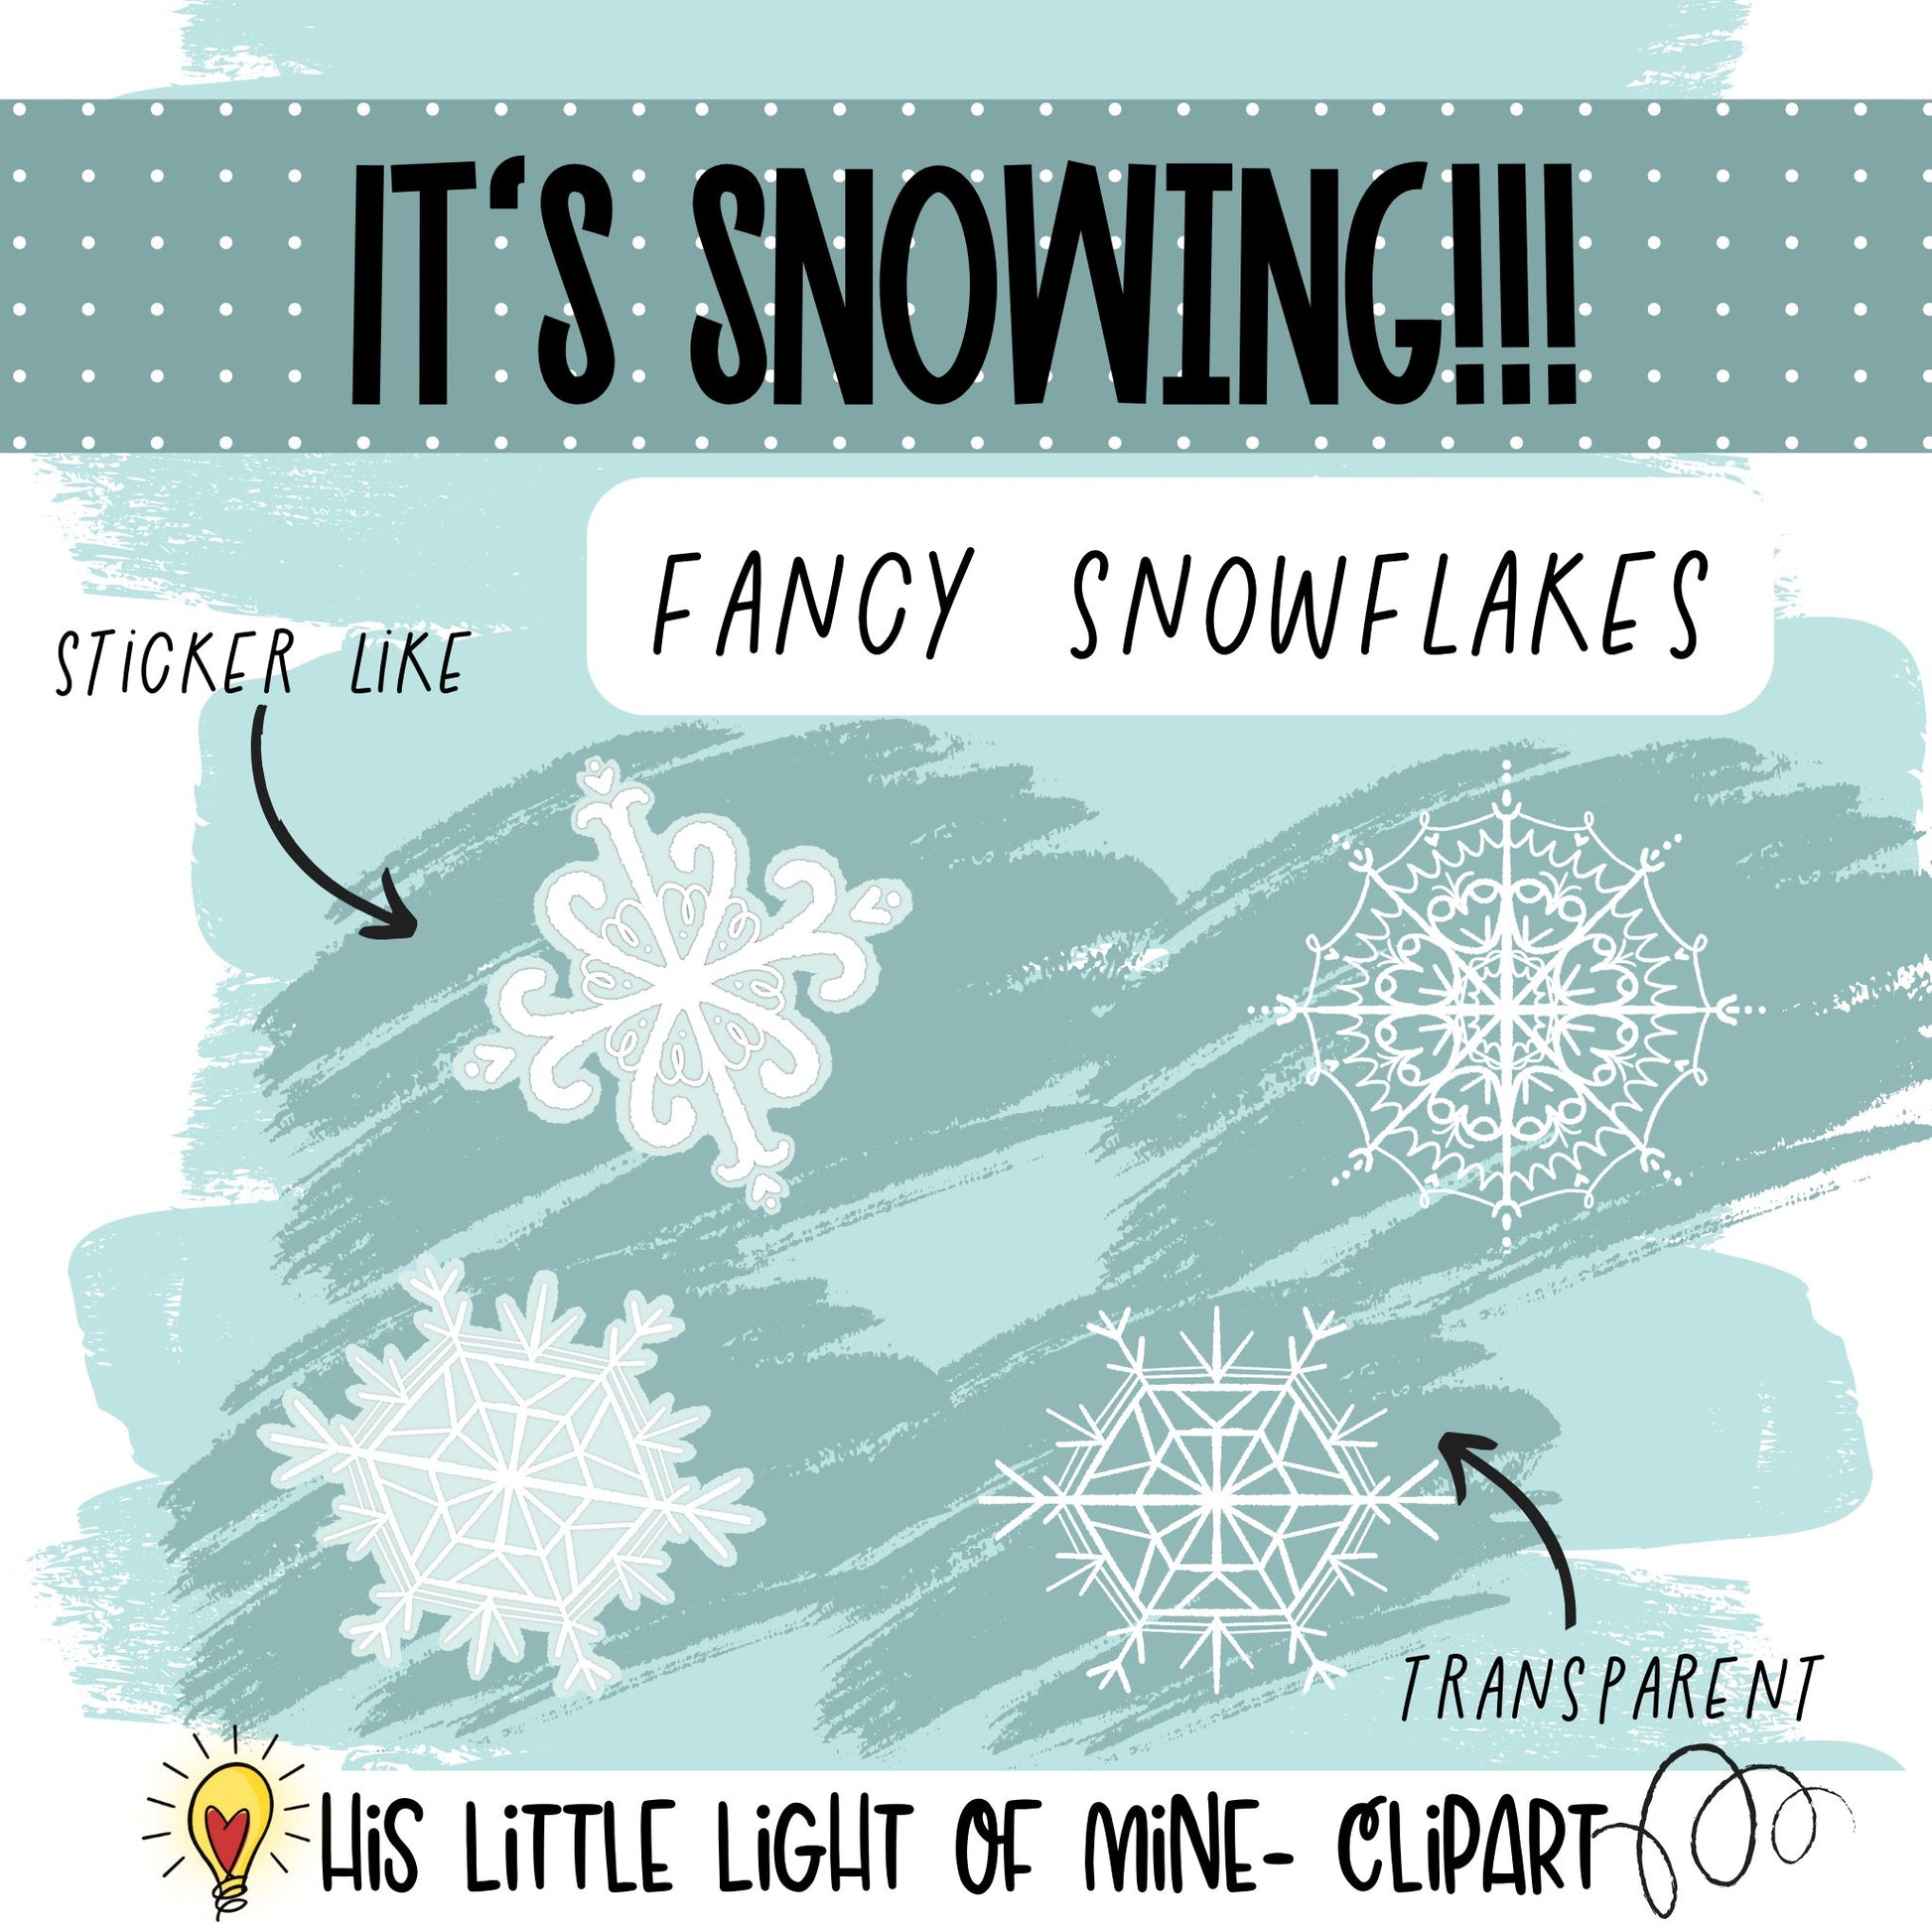 It’s Snowing clip art pack showing fancy snowflakes in a sticker like style and transparent